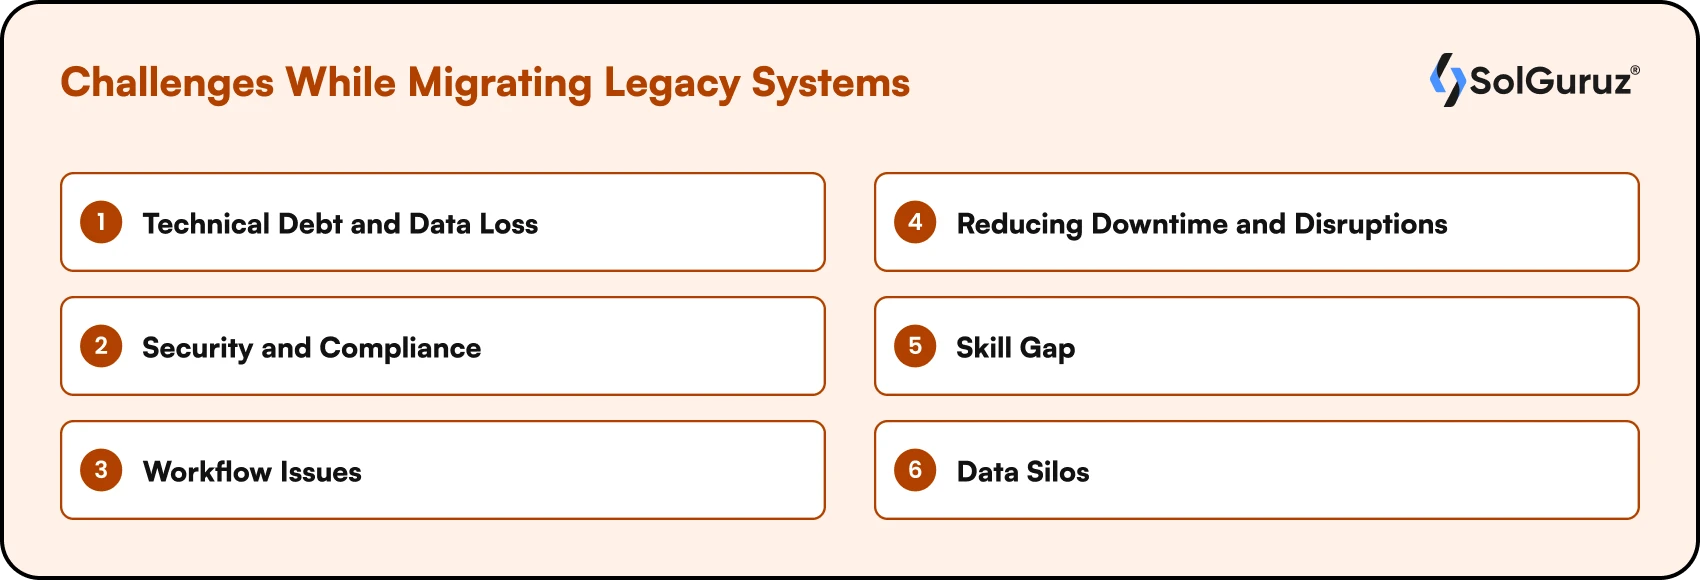 Challenges While Migrating Legacy Systems